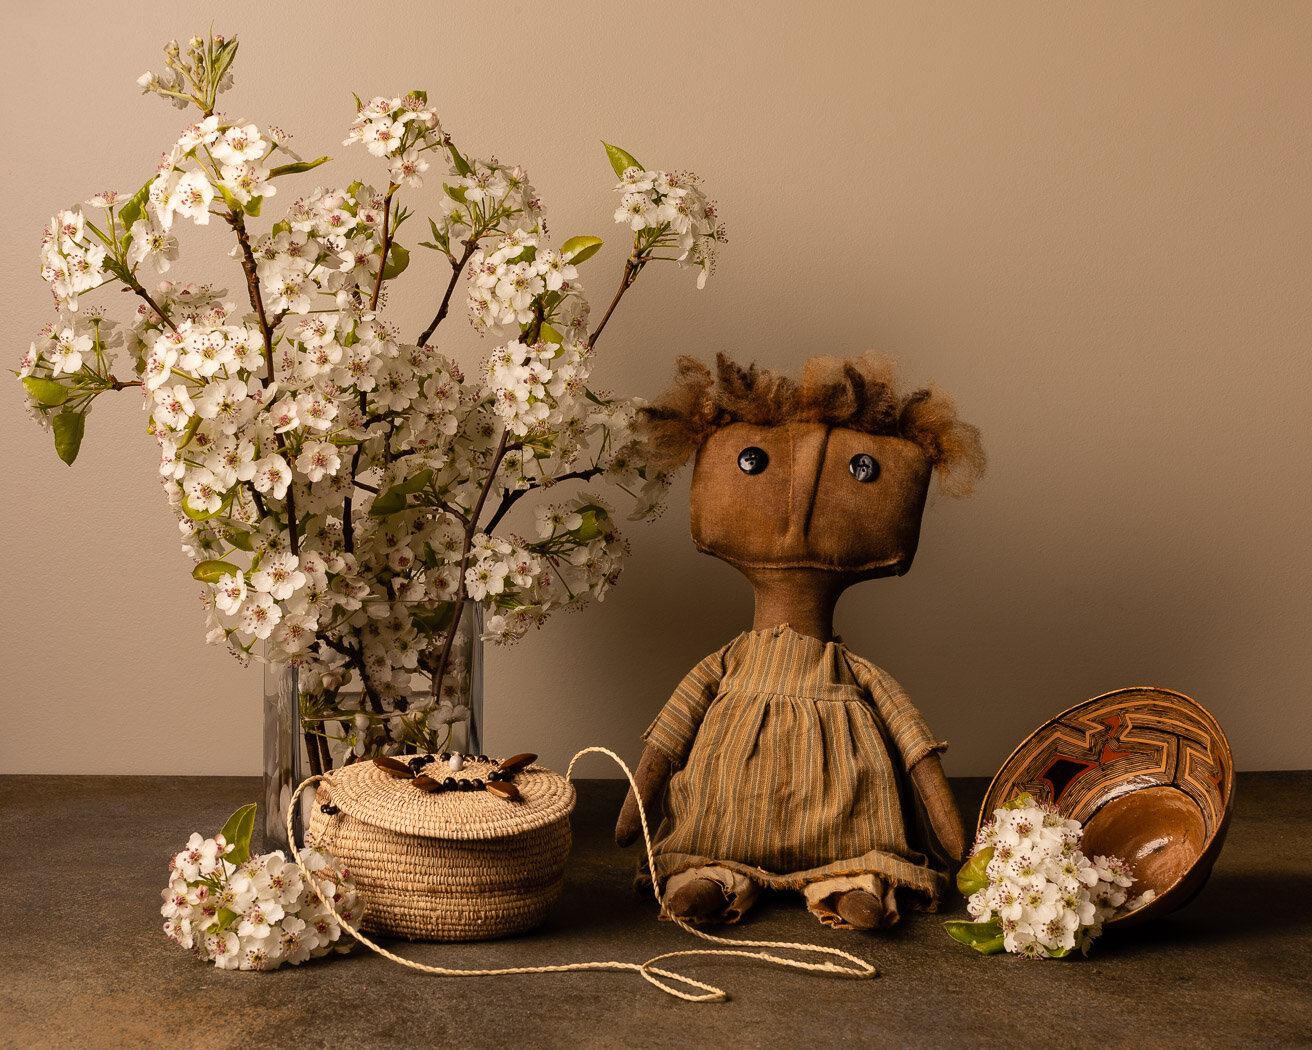 Still Life with Rustic Doll, Pear Blossoms and Handmade Items from the Ecuadorean Amazon